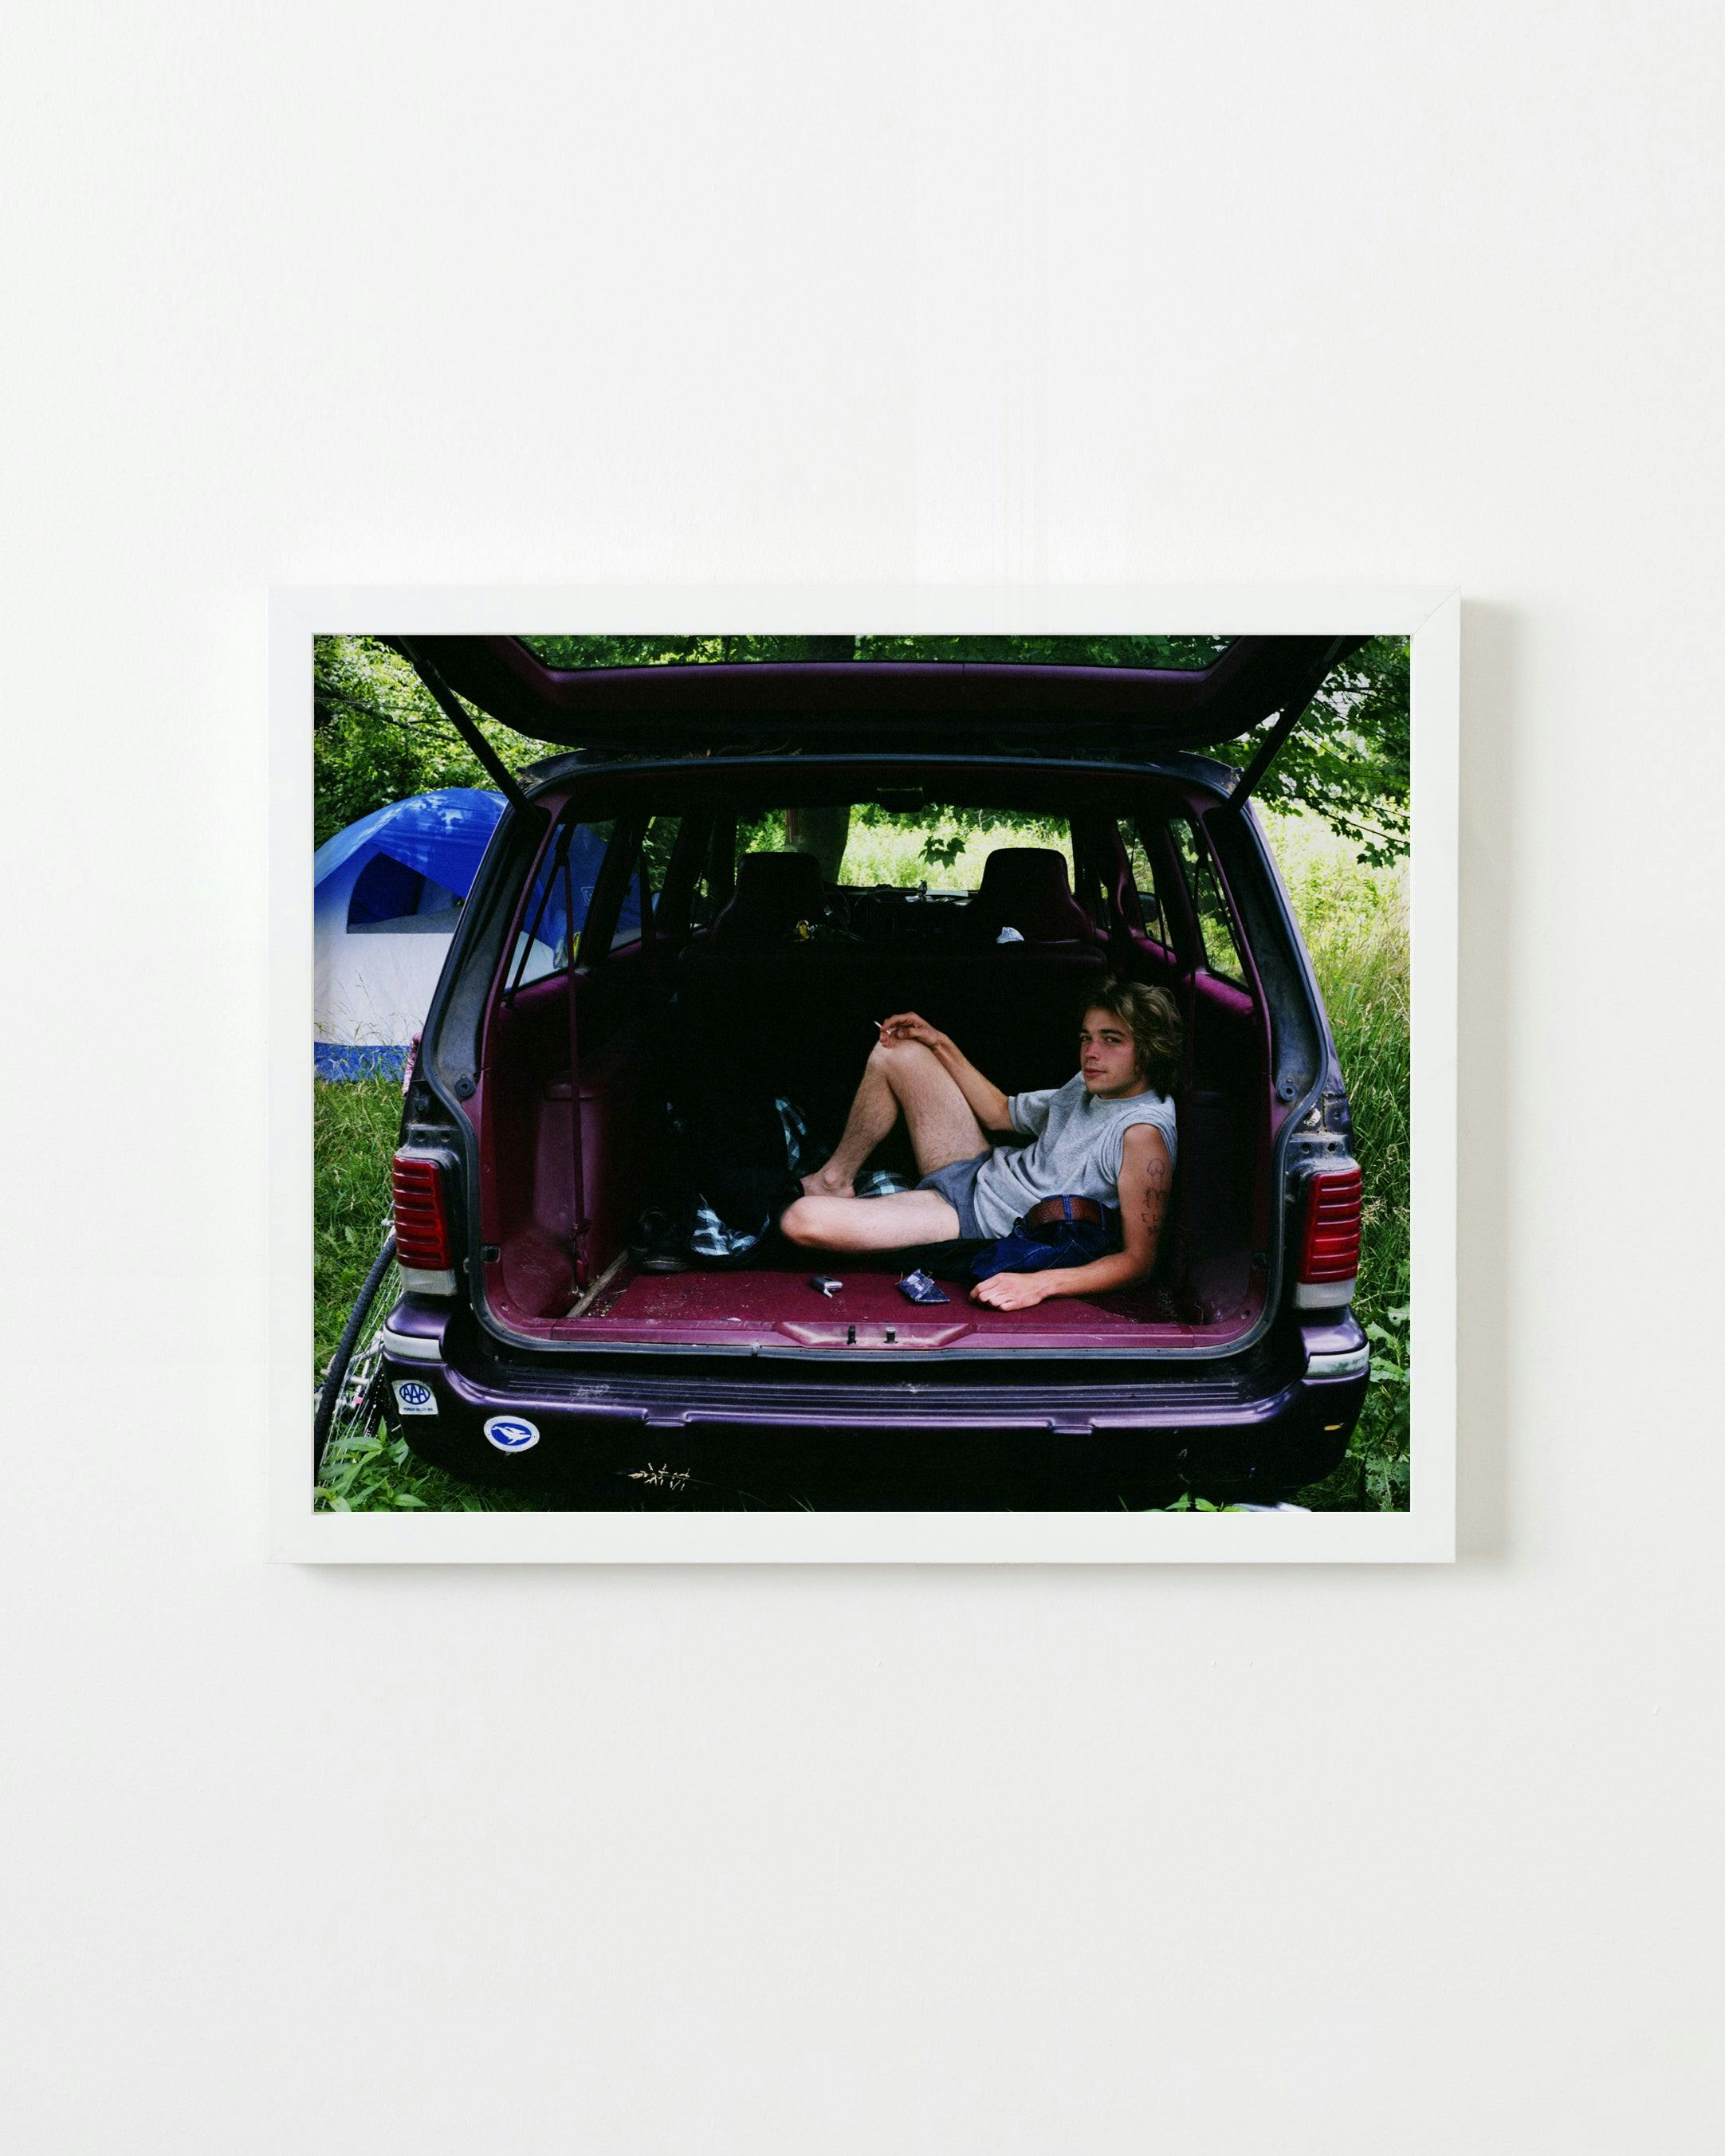 Photography by Nick Meyer titled "Joe in the Van".